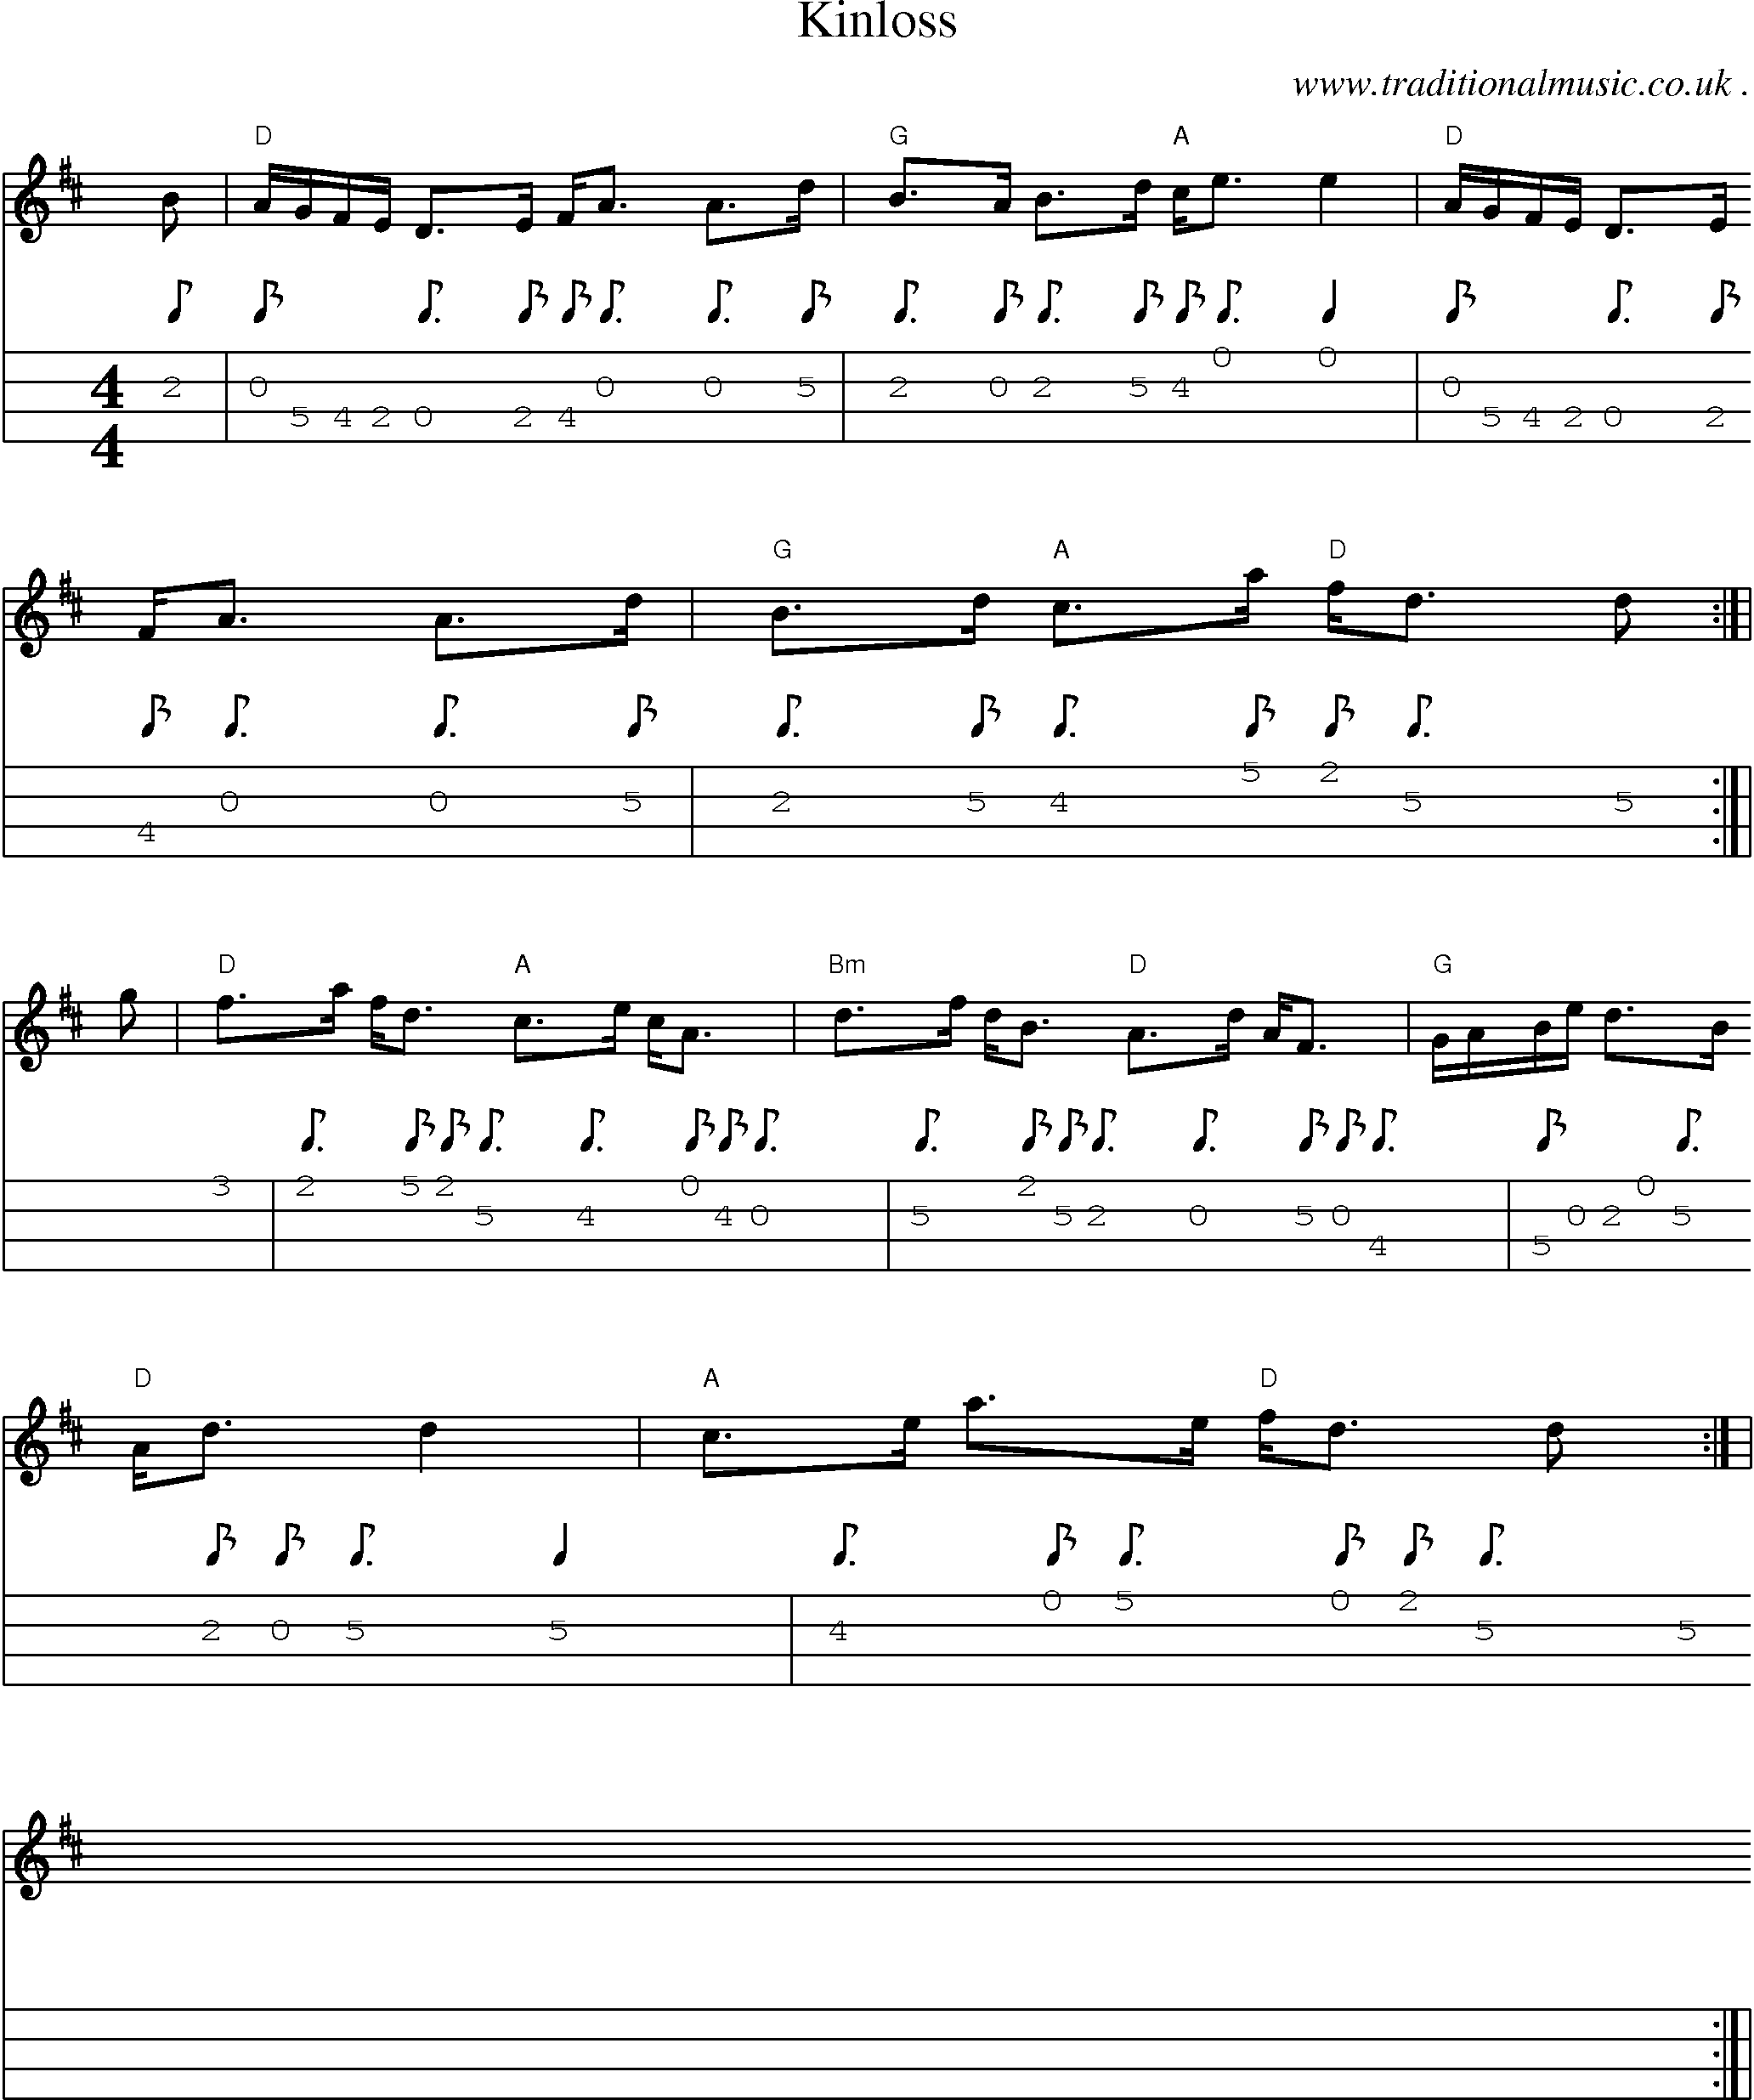 Sheet-music  score, Chords and Mandolin Tabs for Kinloss